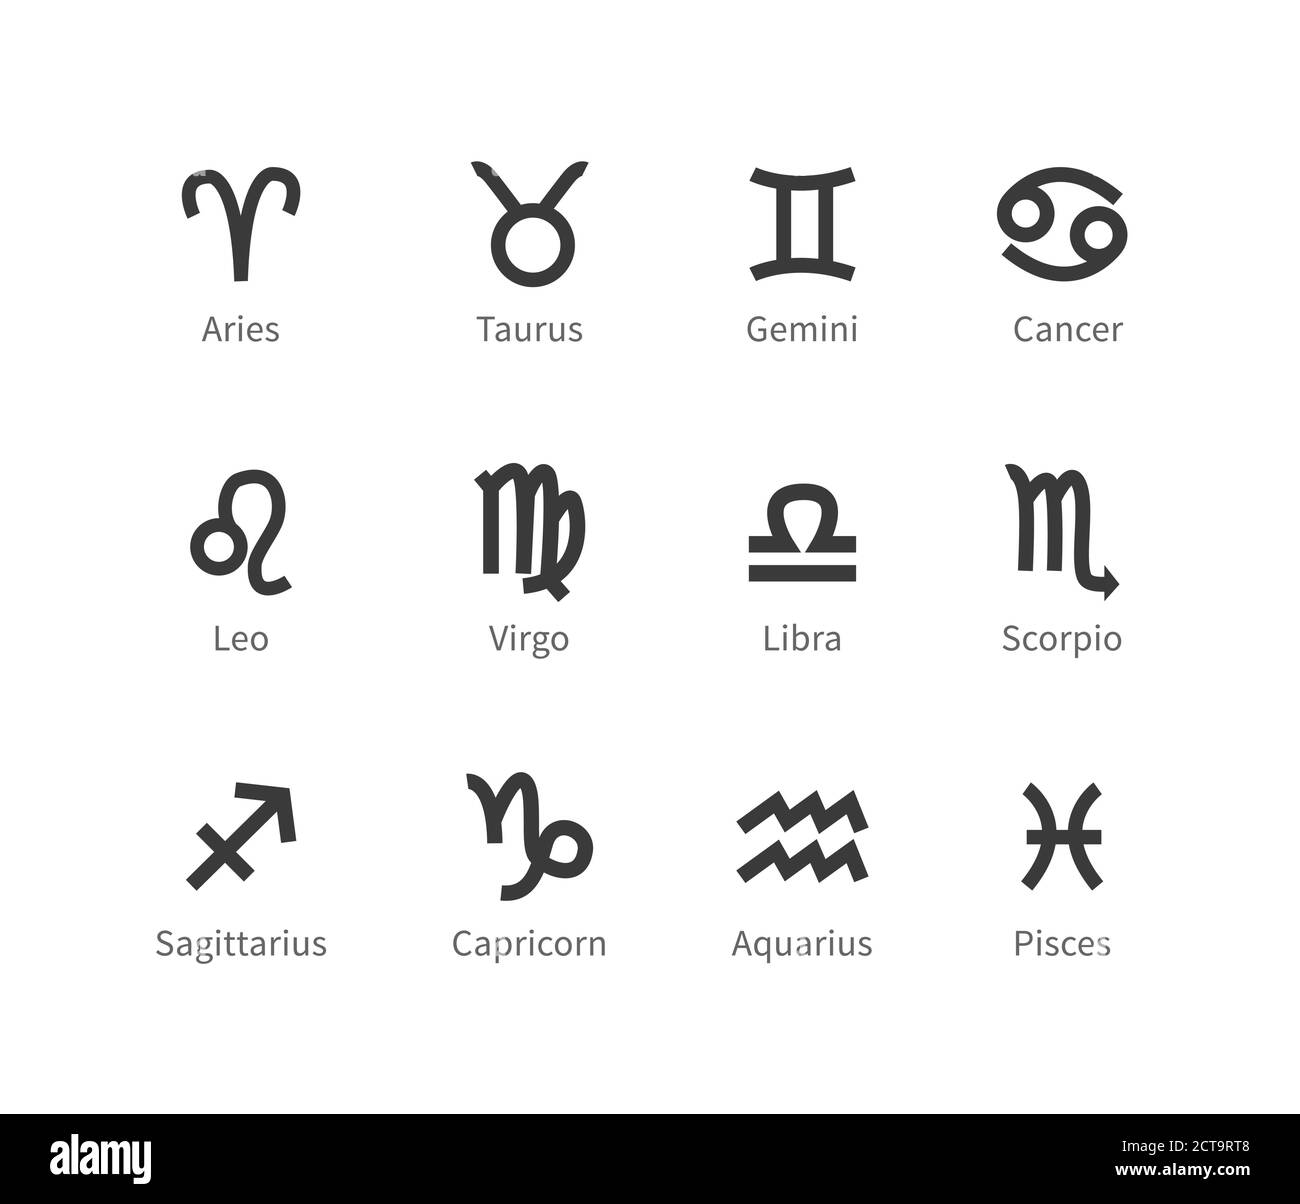 Zodiac signs Black and White Stock Photos & Images - Alamy